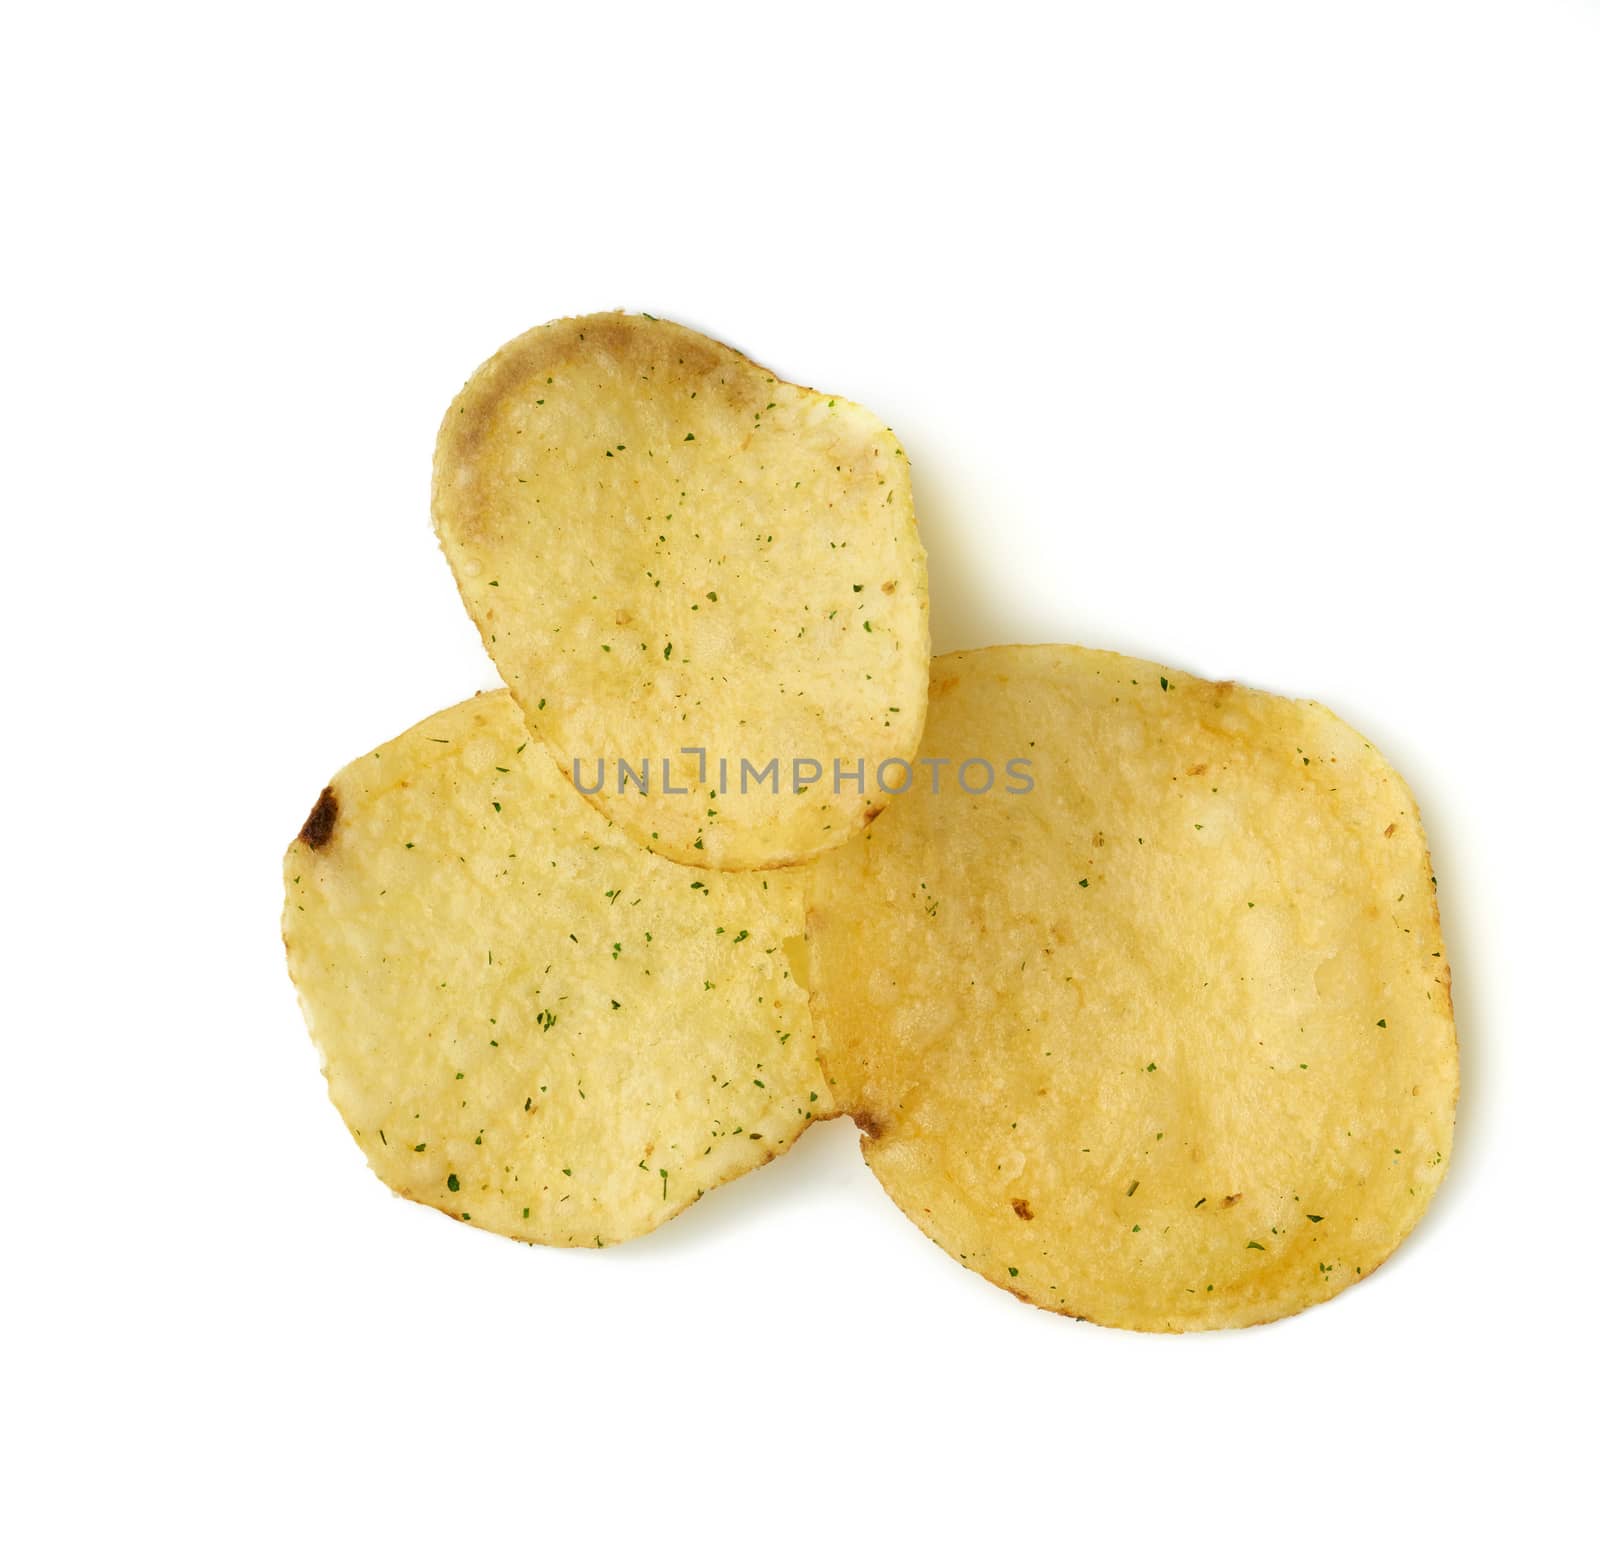 round yellow fried potato chips with dill, food with spice, top view